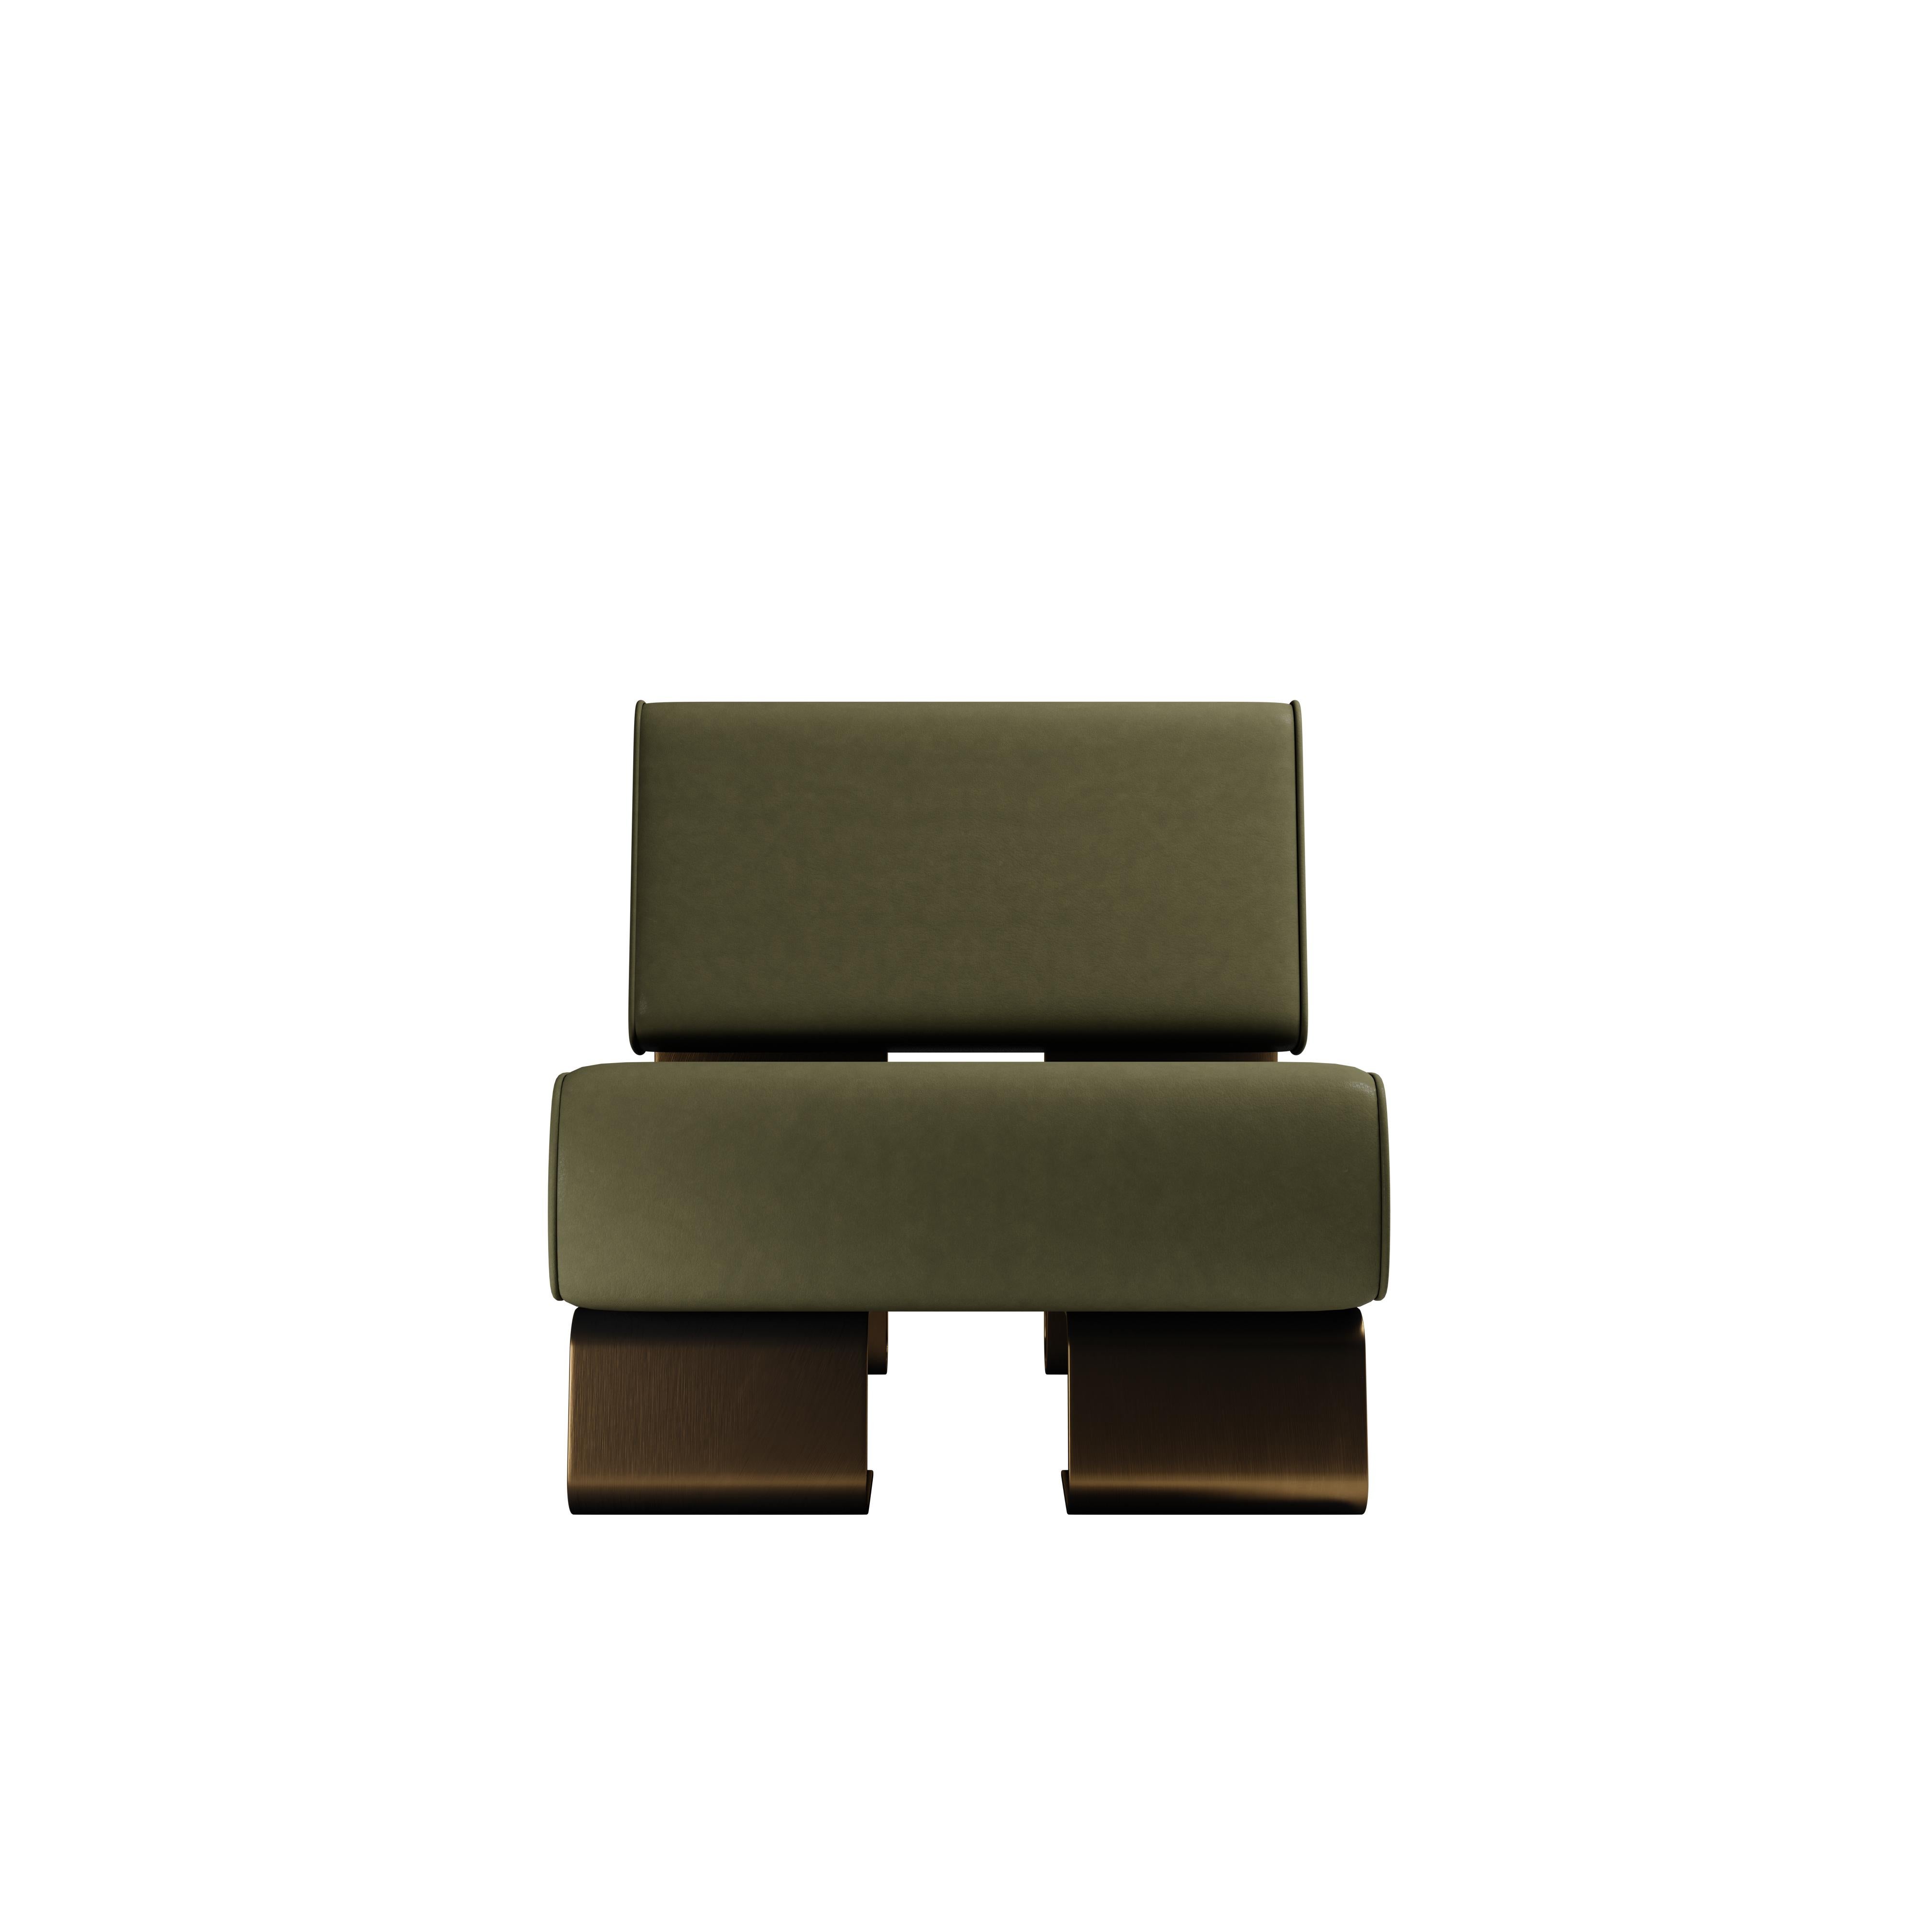 Contemporary 21st Century Rushmore Armchair Brass Leather by Porus Studio For Sale